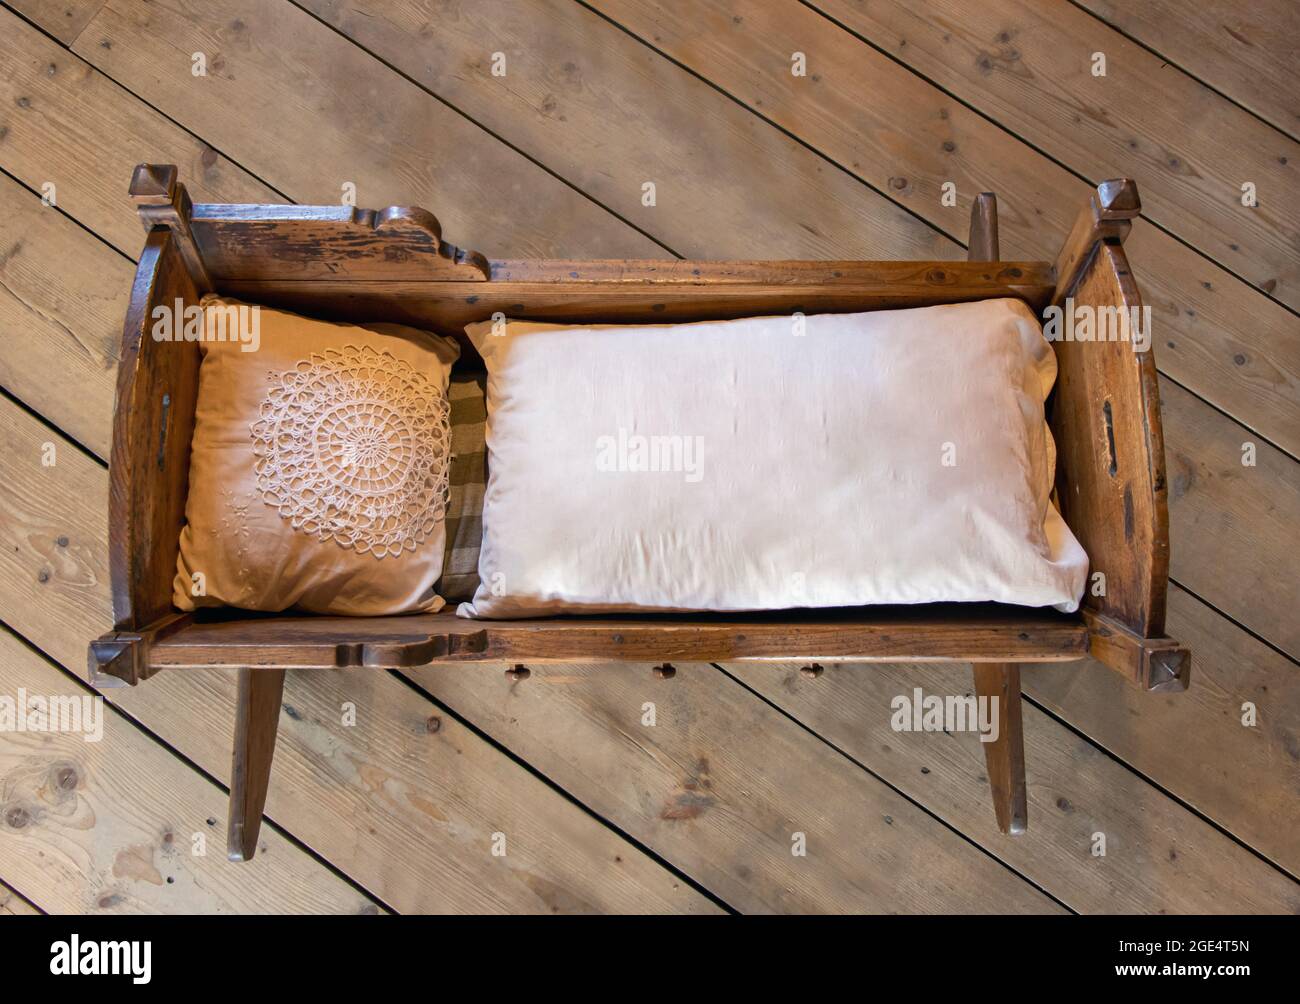 Old cradle with duvet and pillow on the wooden floor. Stock Photo